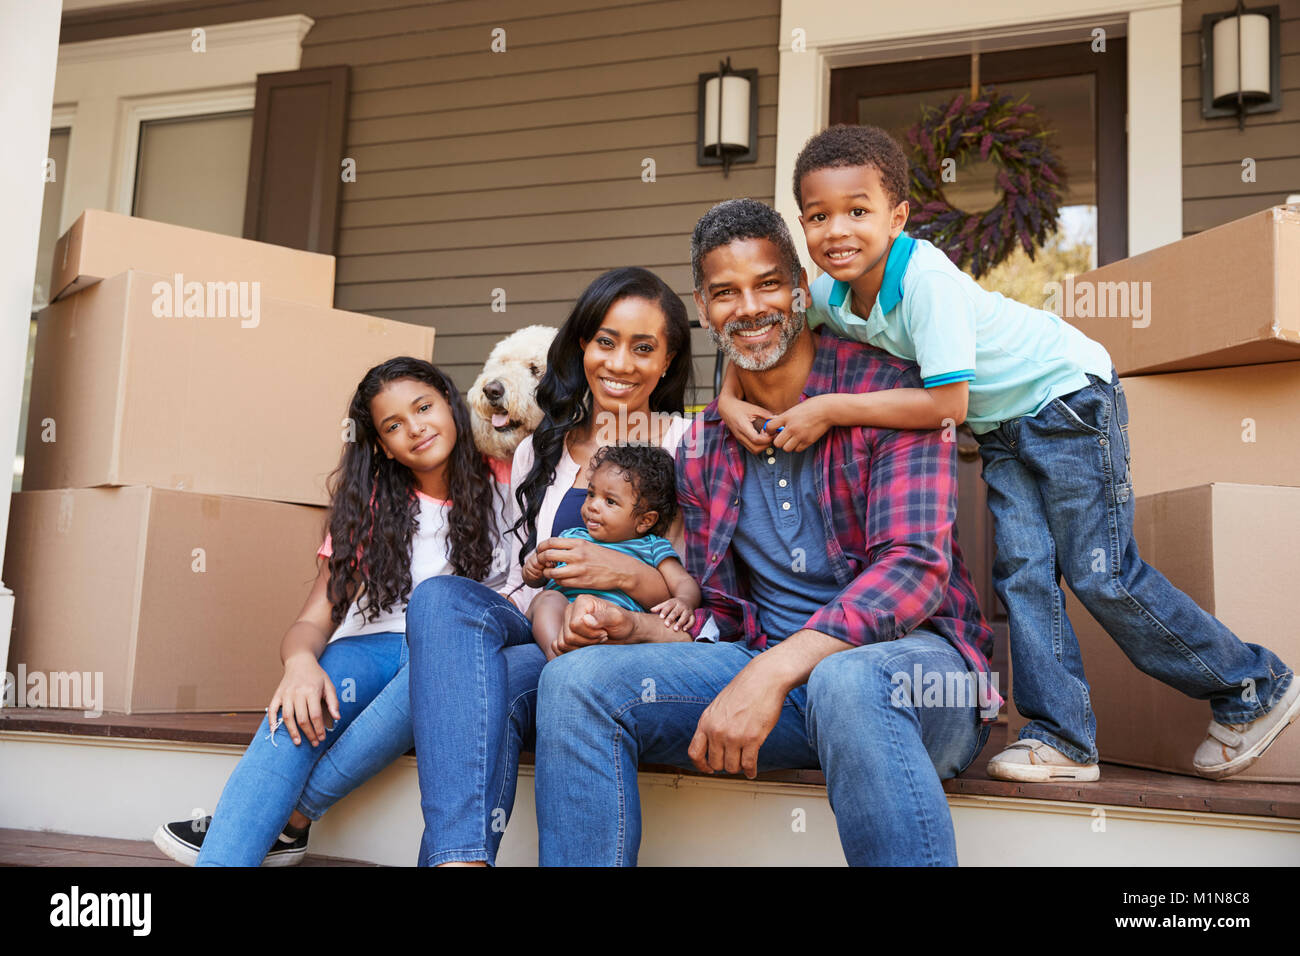 Family With Children And Pet Dog Outside House On Moving Day Stock Photo